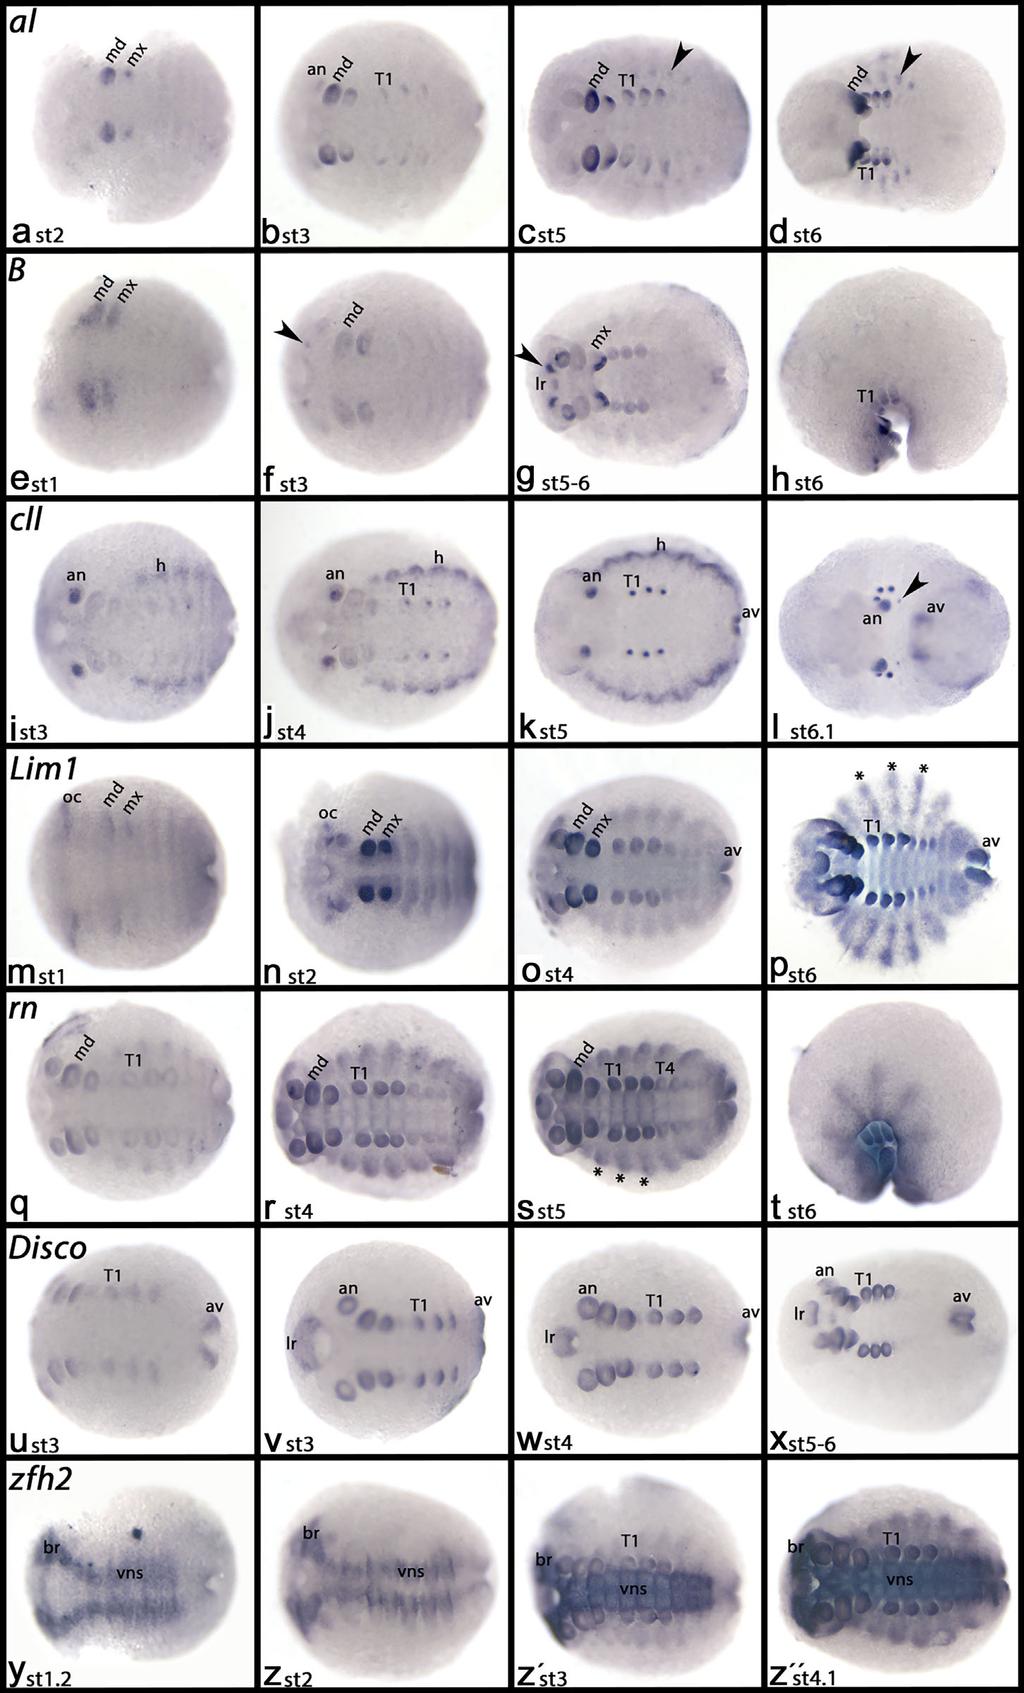 JANSSEN 129 FIGURE 3 Expression of al, B, cll, Lim1, rn, disco, and zfh2. In all panels, anterior is to the left, ventral view; except for panel t (lateral view). Developmental stage is indicated.